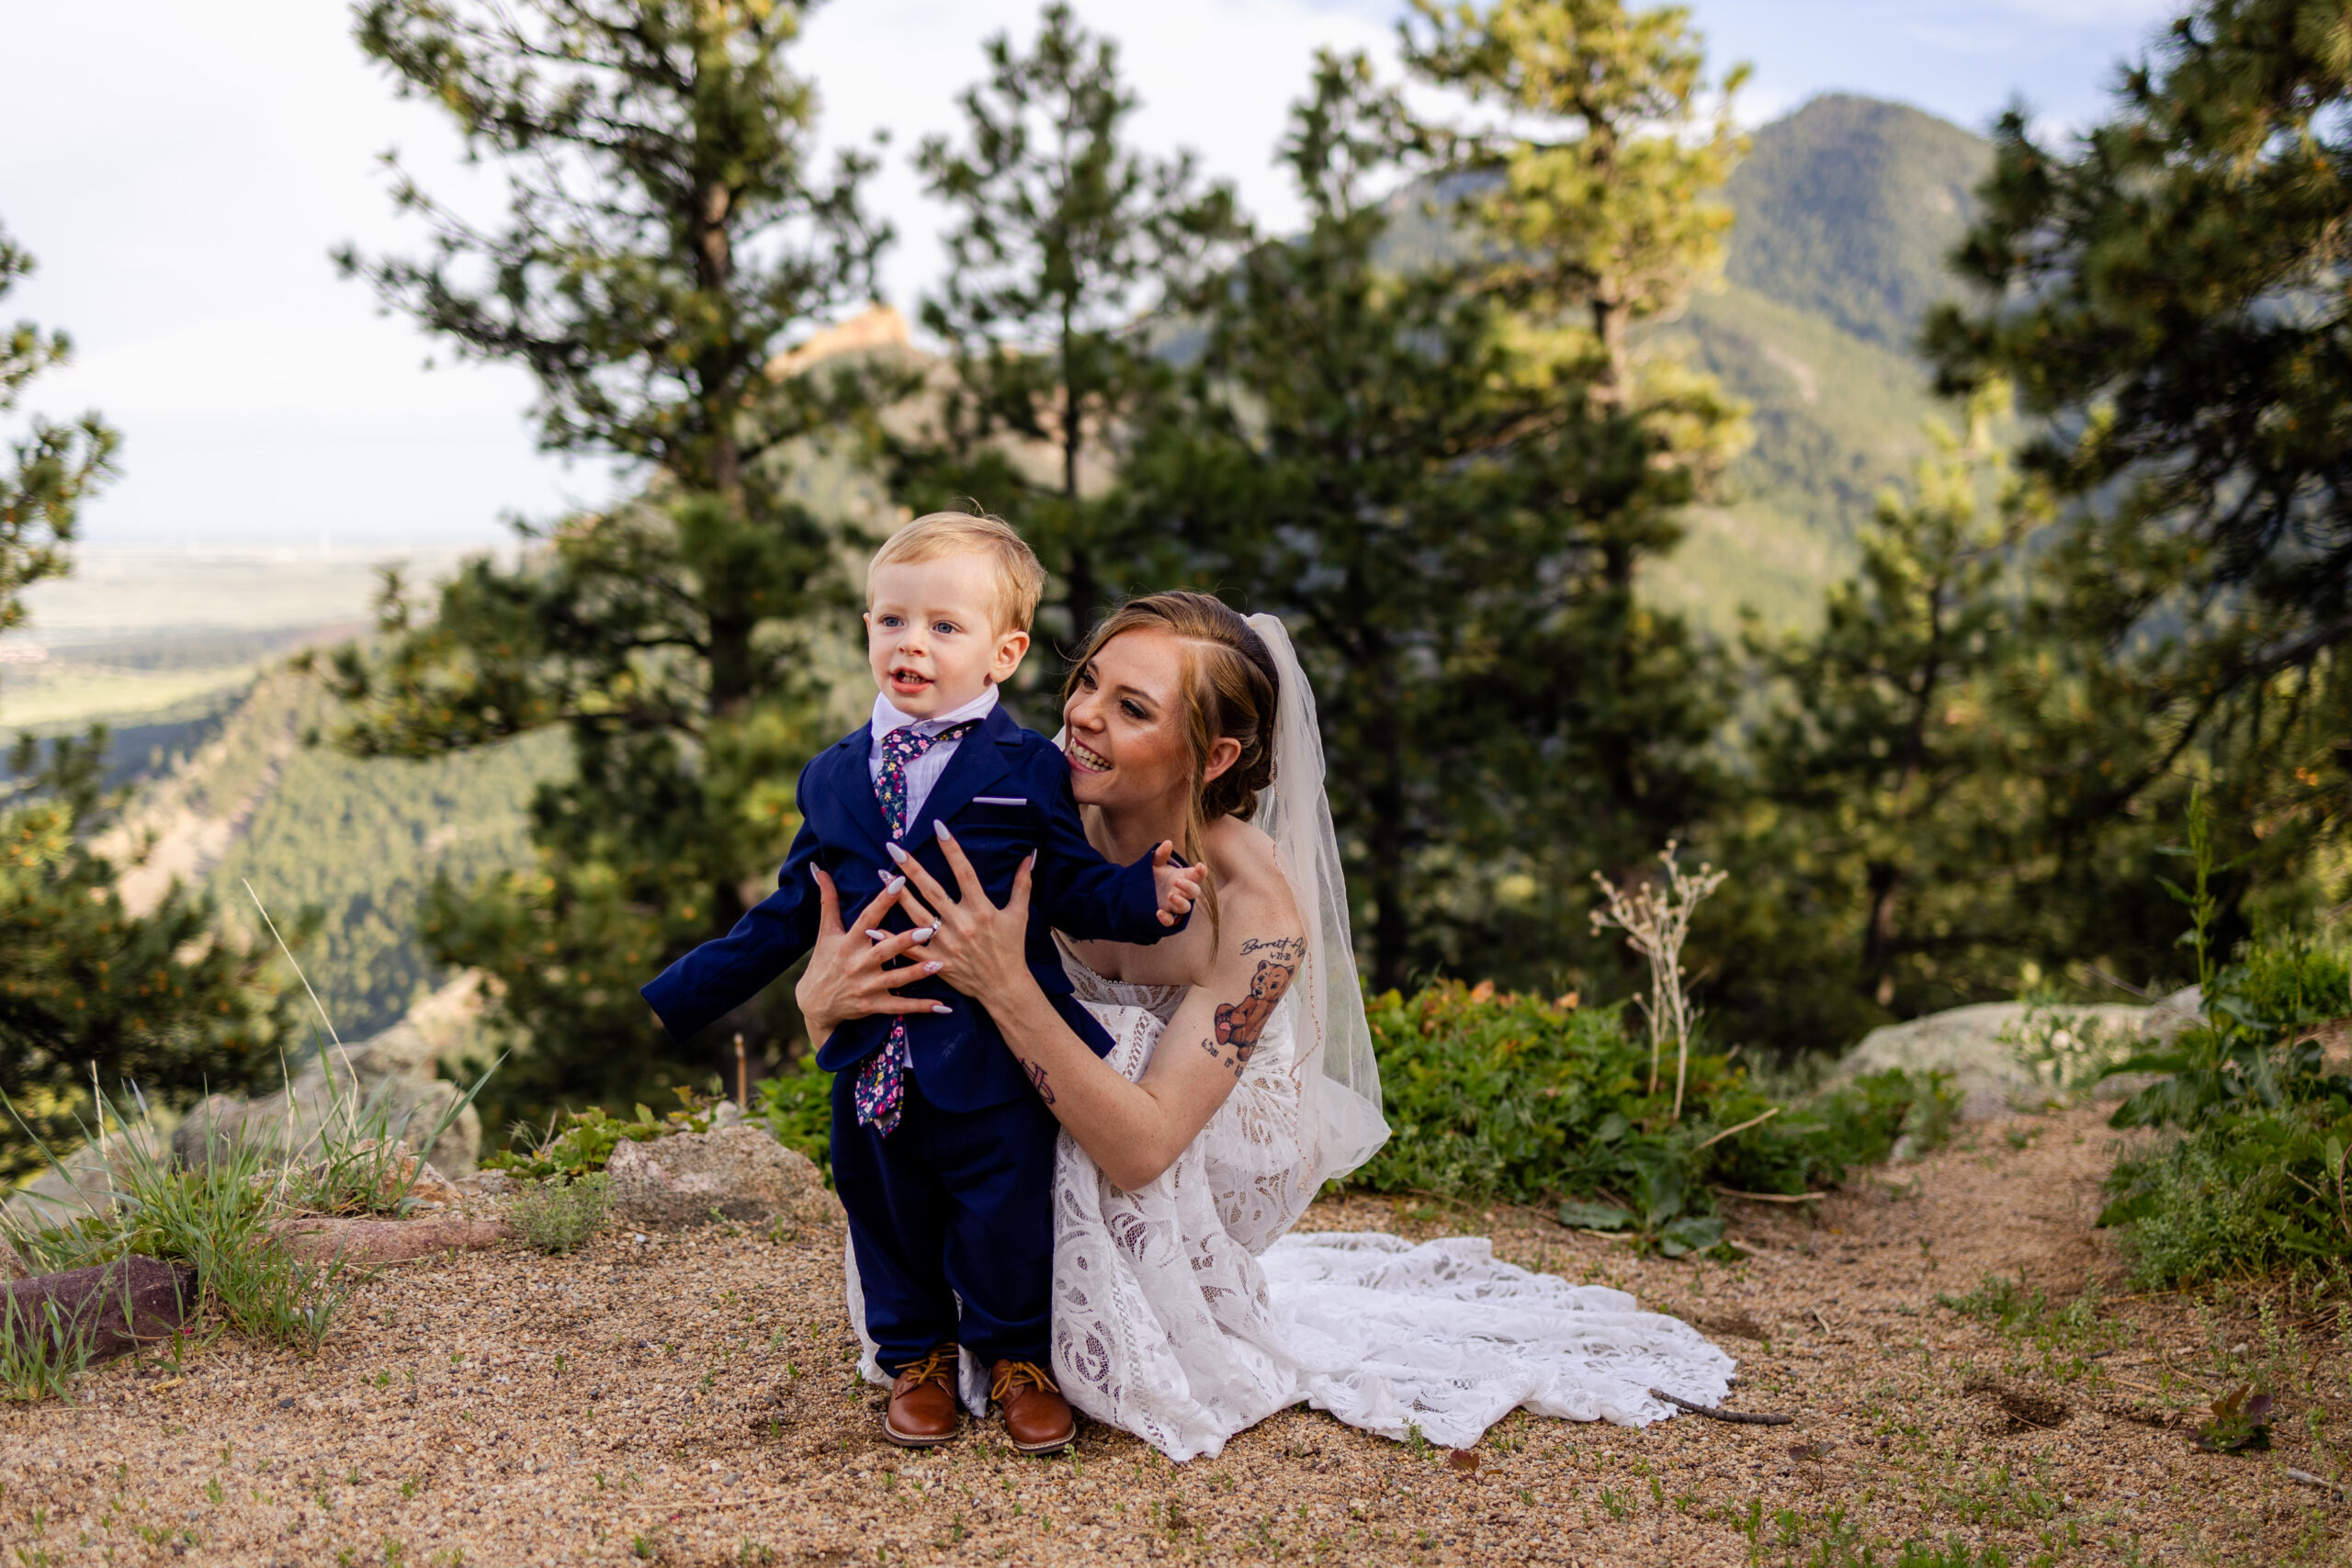 the bride and her son at Sunrise Amphitheater after their Elopement ceremony.